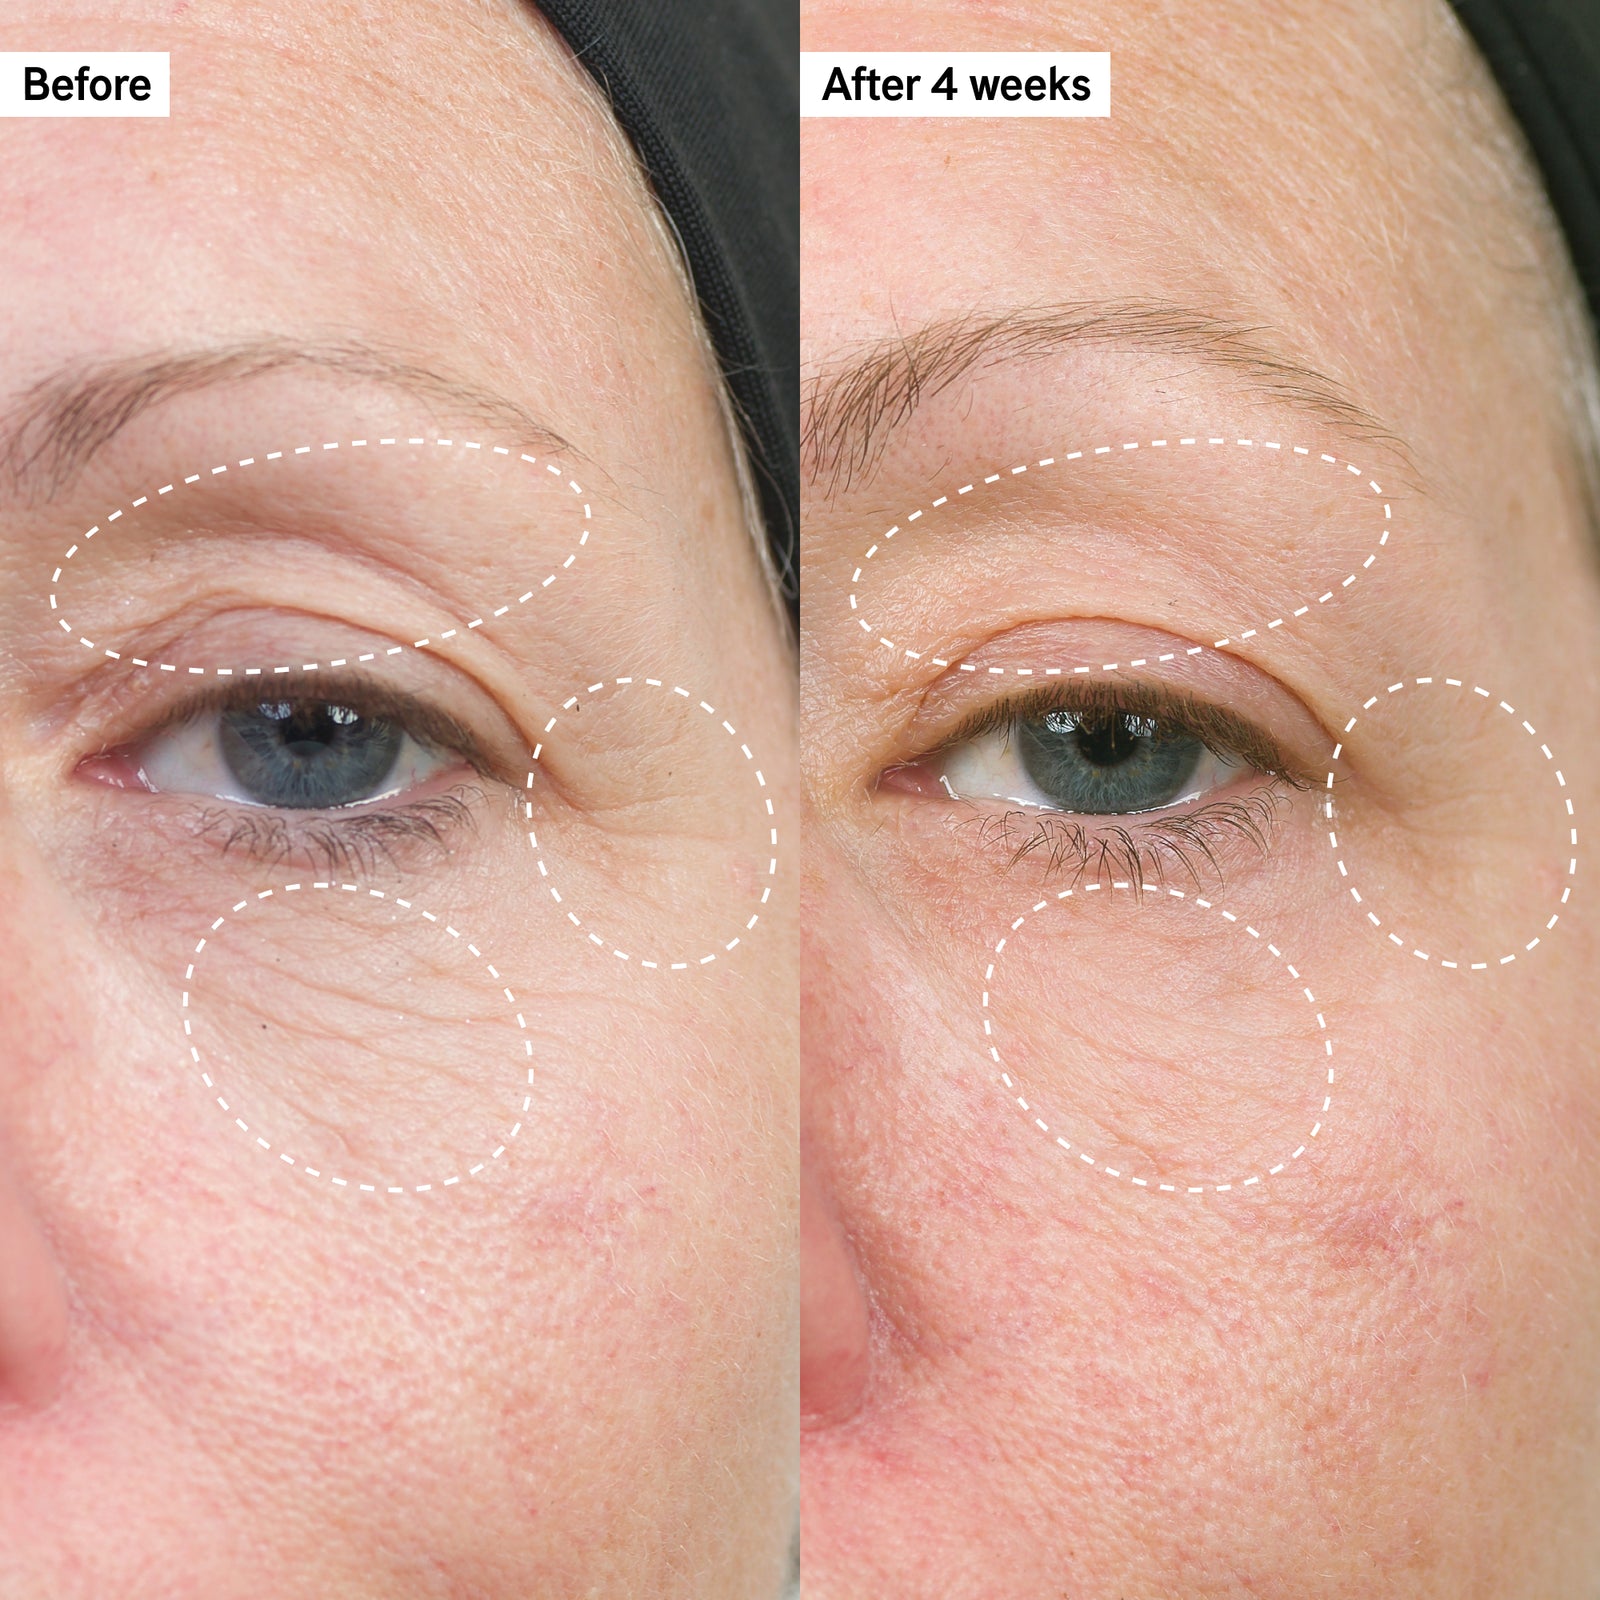 Before and after images to show Bio-Active Ceramide Repairing and Plumping Moisturiser results after 4 weeks